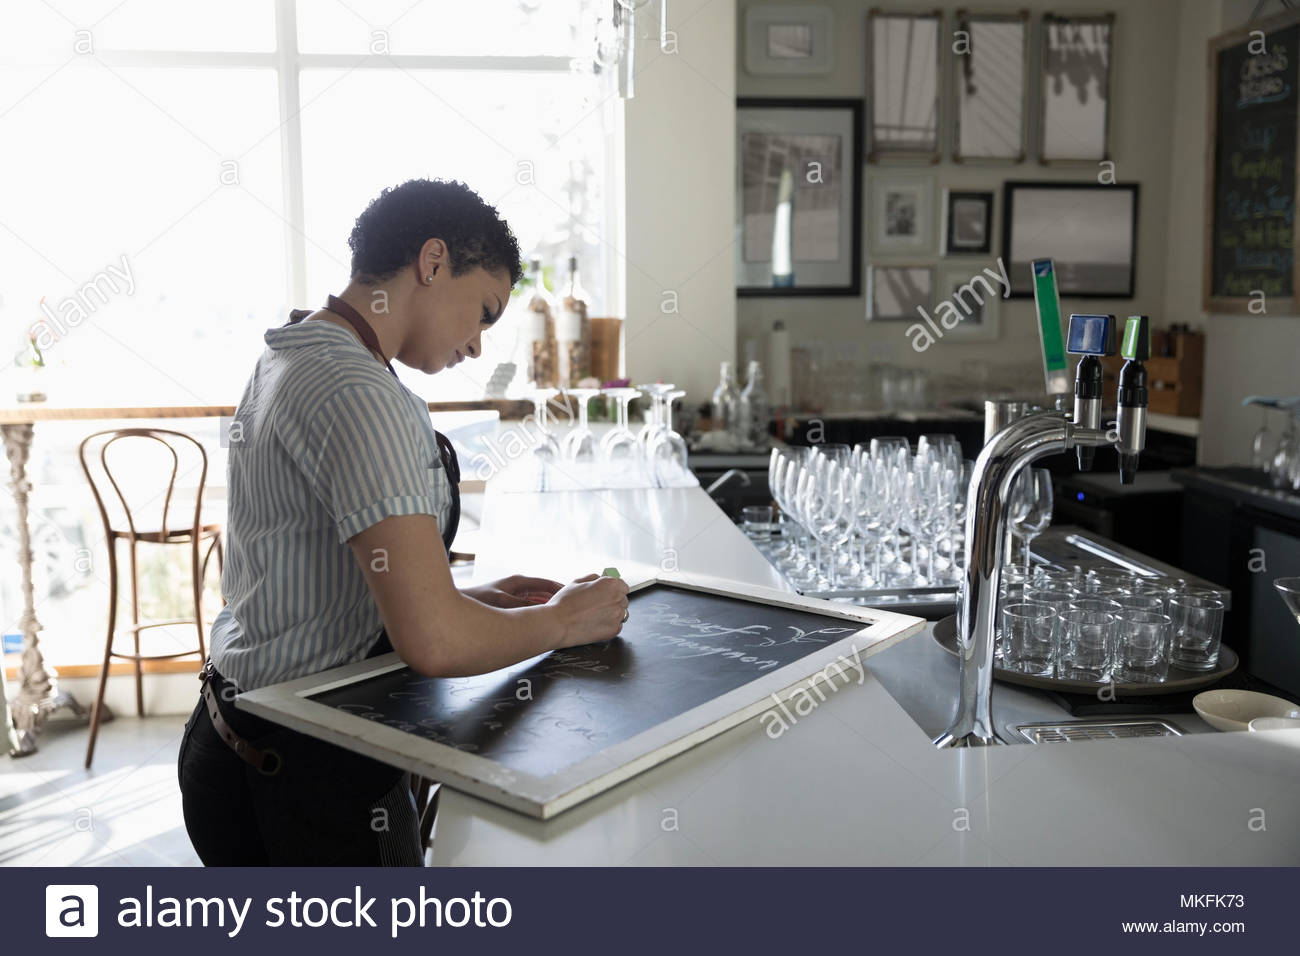 Young woman small business owner preparing menu on cafe blackboard Stock Photo